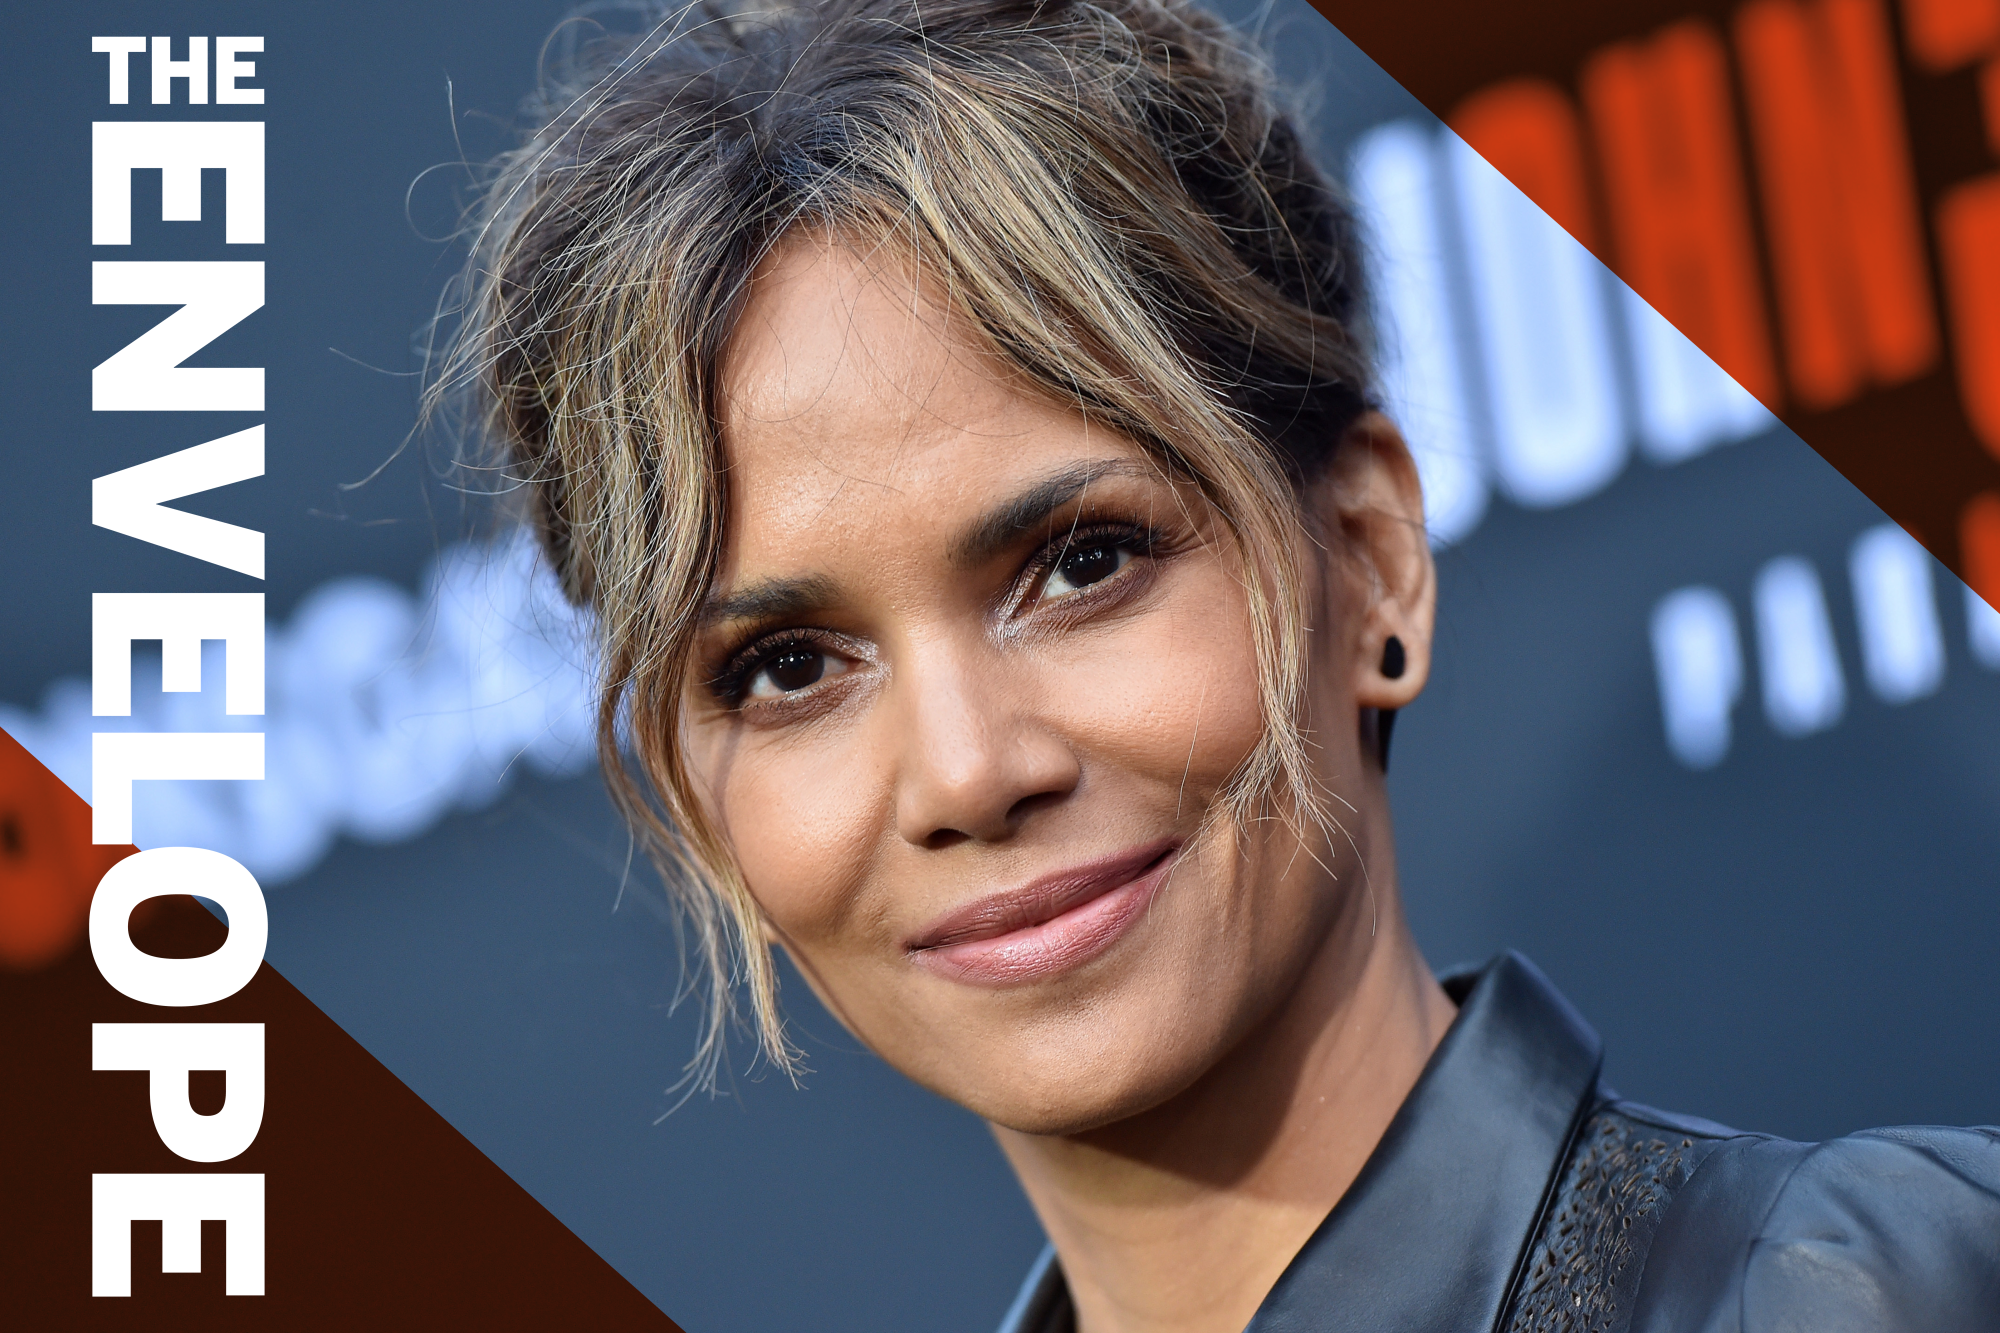 A headshot of Halle Berry with the words "The Envelope" on the right side 